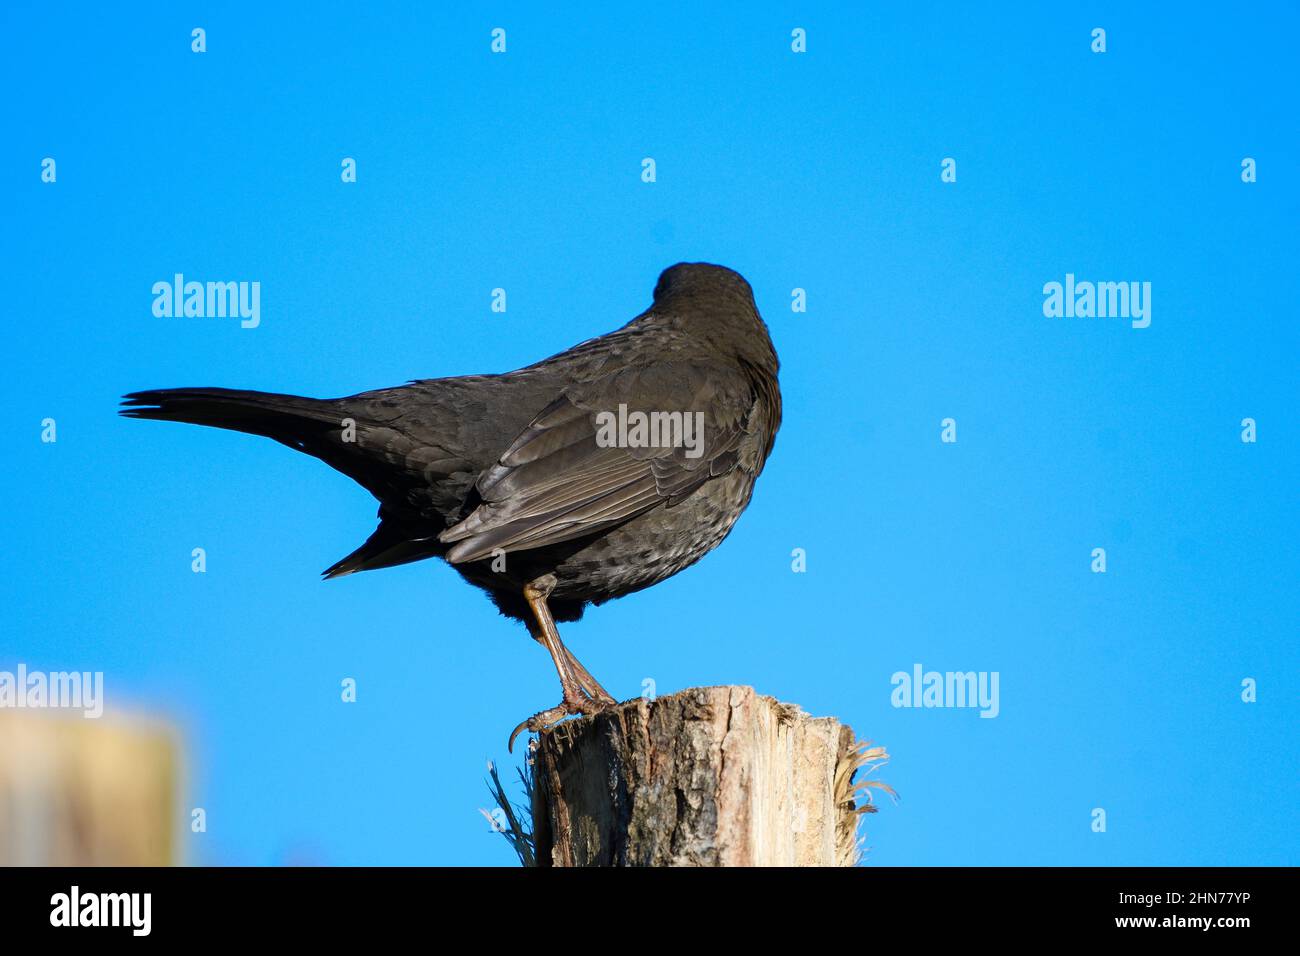 Blackbird from the back perched on a stake Stock Photo